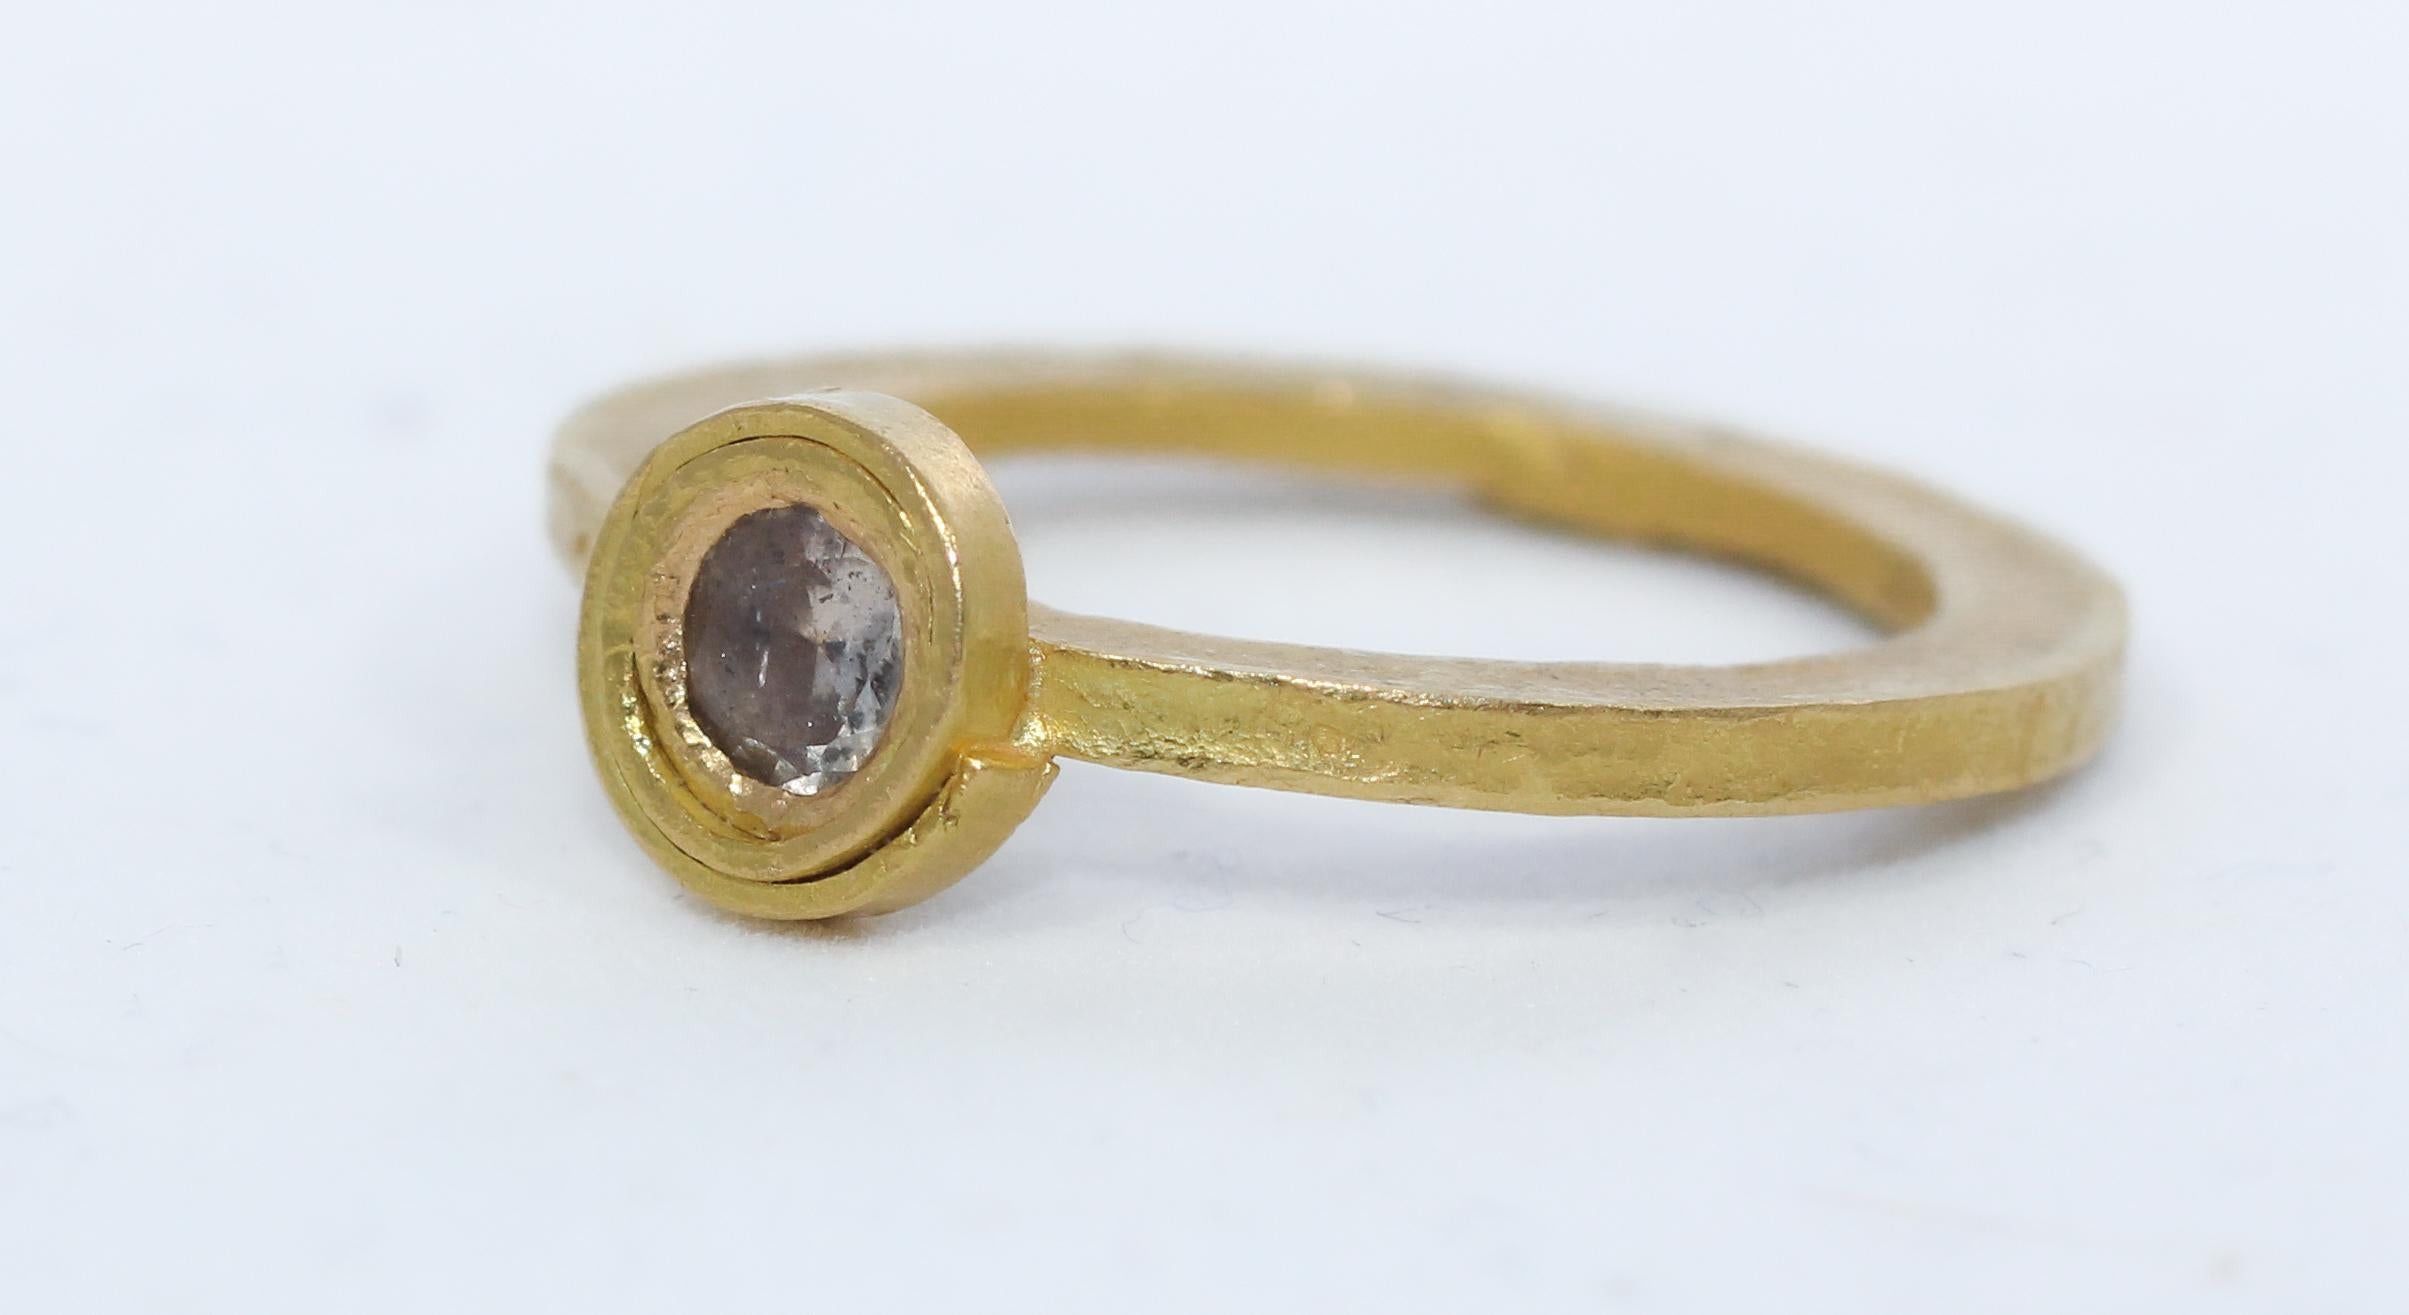 An Alternative Engagement or Bridal handmade diamond stackable ring in a rich colored recycled 22K and 22K gold with brushed hammered finish. .28ct sparkling brown diamond set in an unusual spiral bezel. Sputnik, Simplicity series contemporary ring